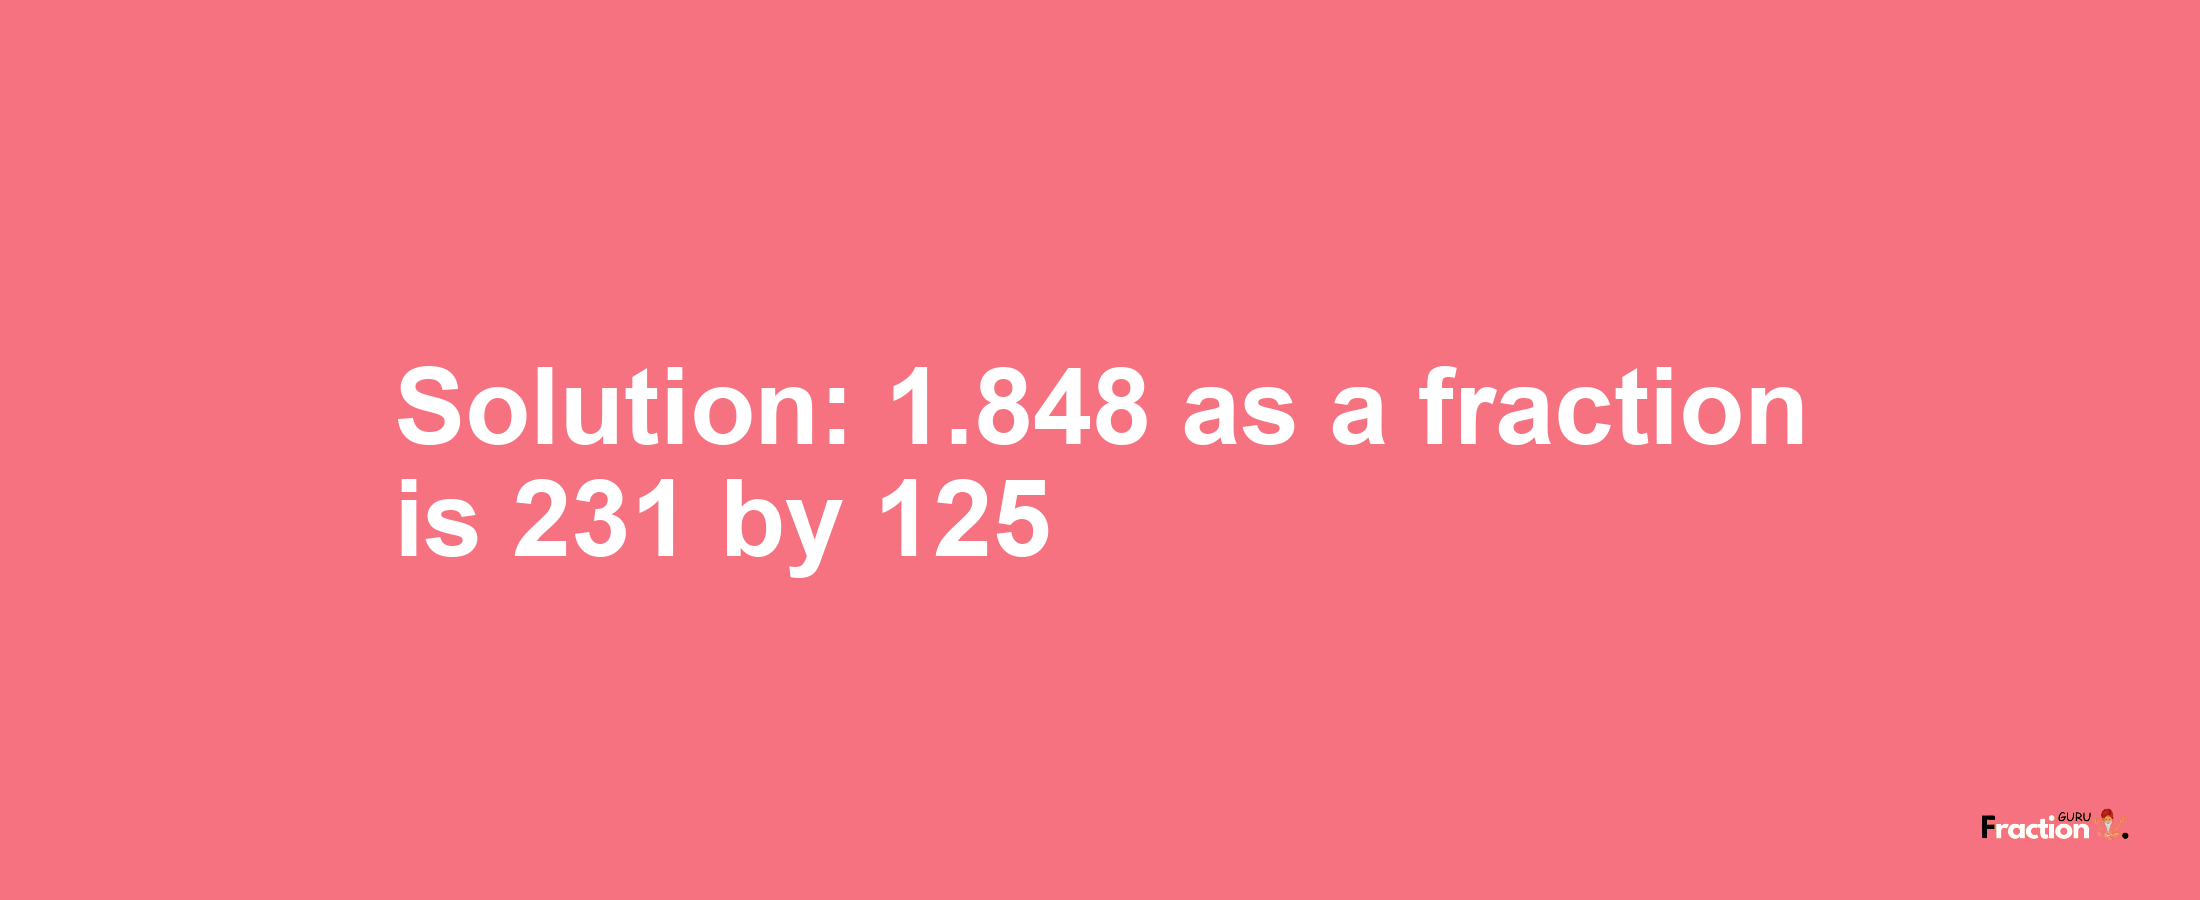 Solution:1.848 as a fraction is 231/125